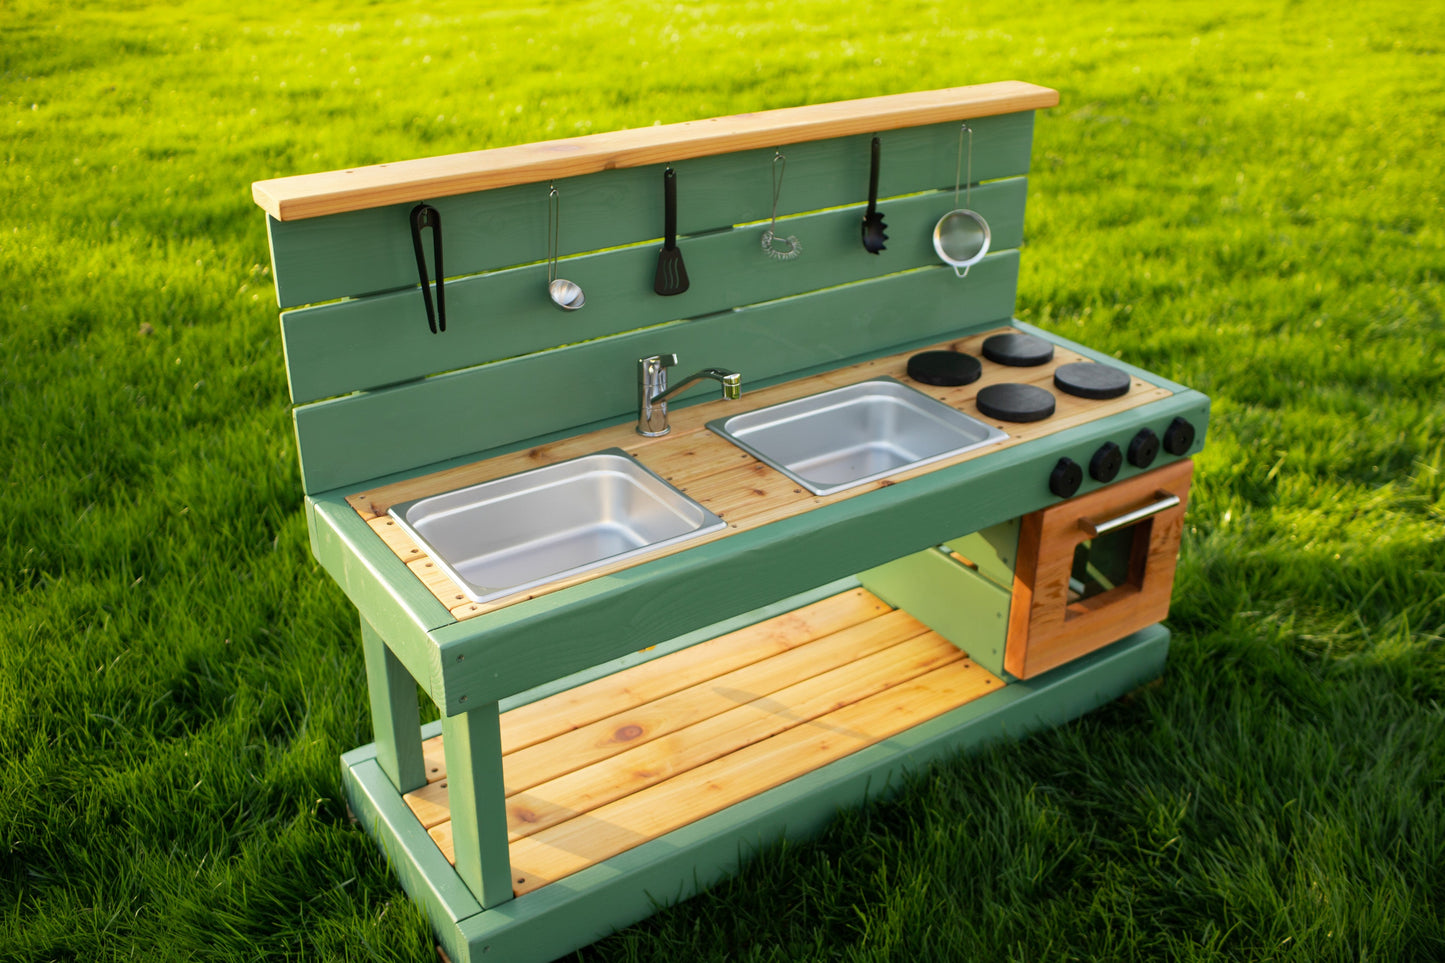 Painted Mud Kitchen with Oven and Working Sink